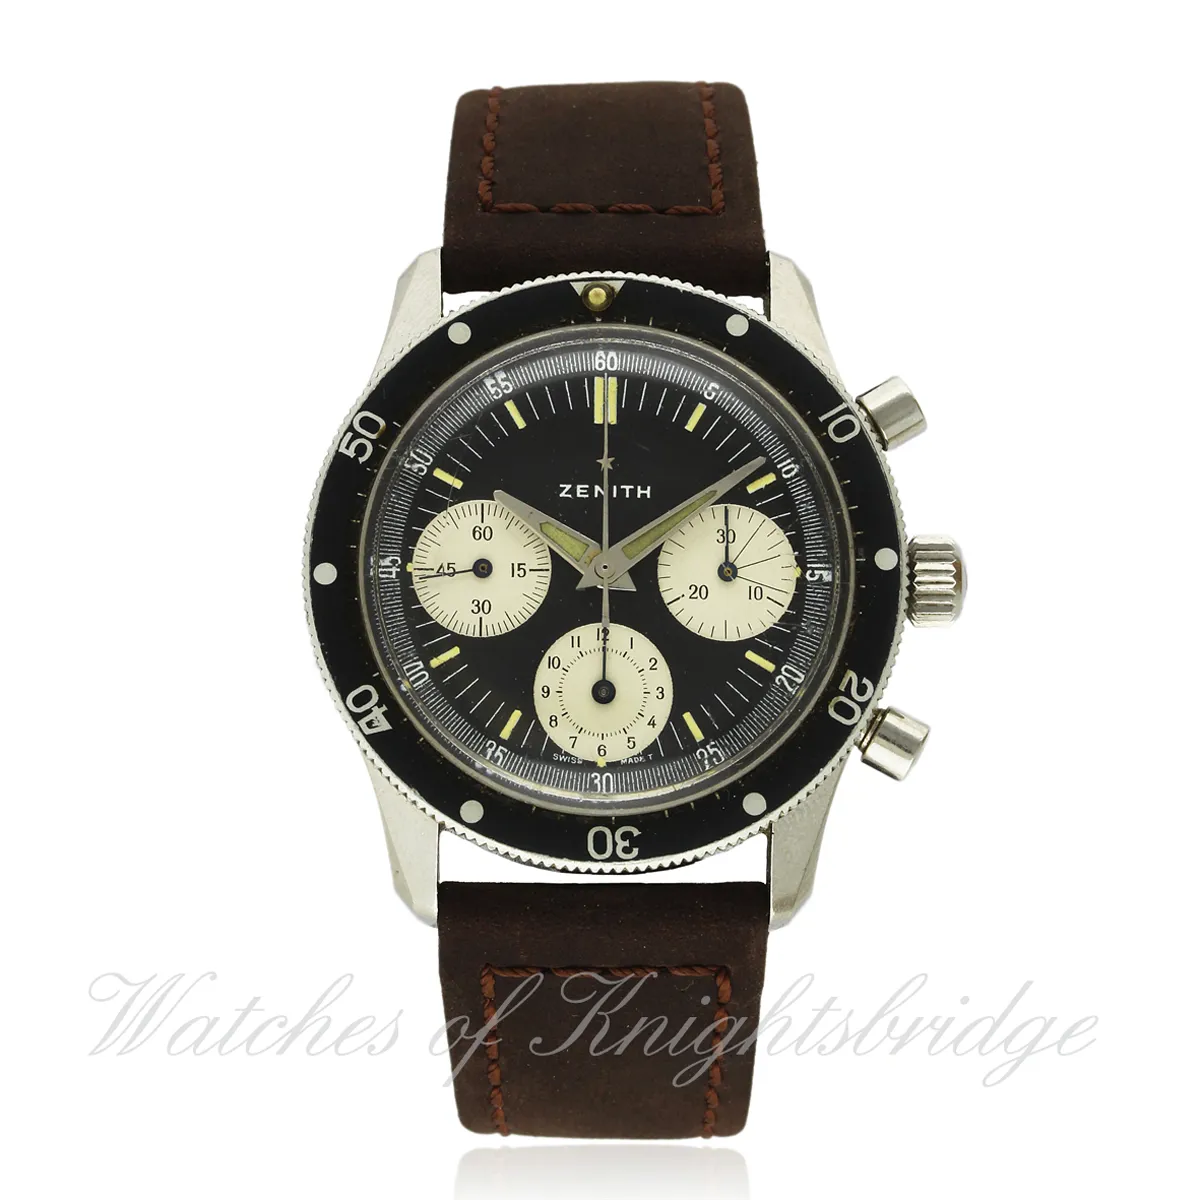 Zenith Chronograph 40mm Stainless steel Black